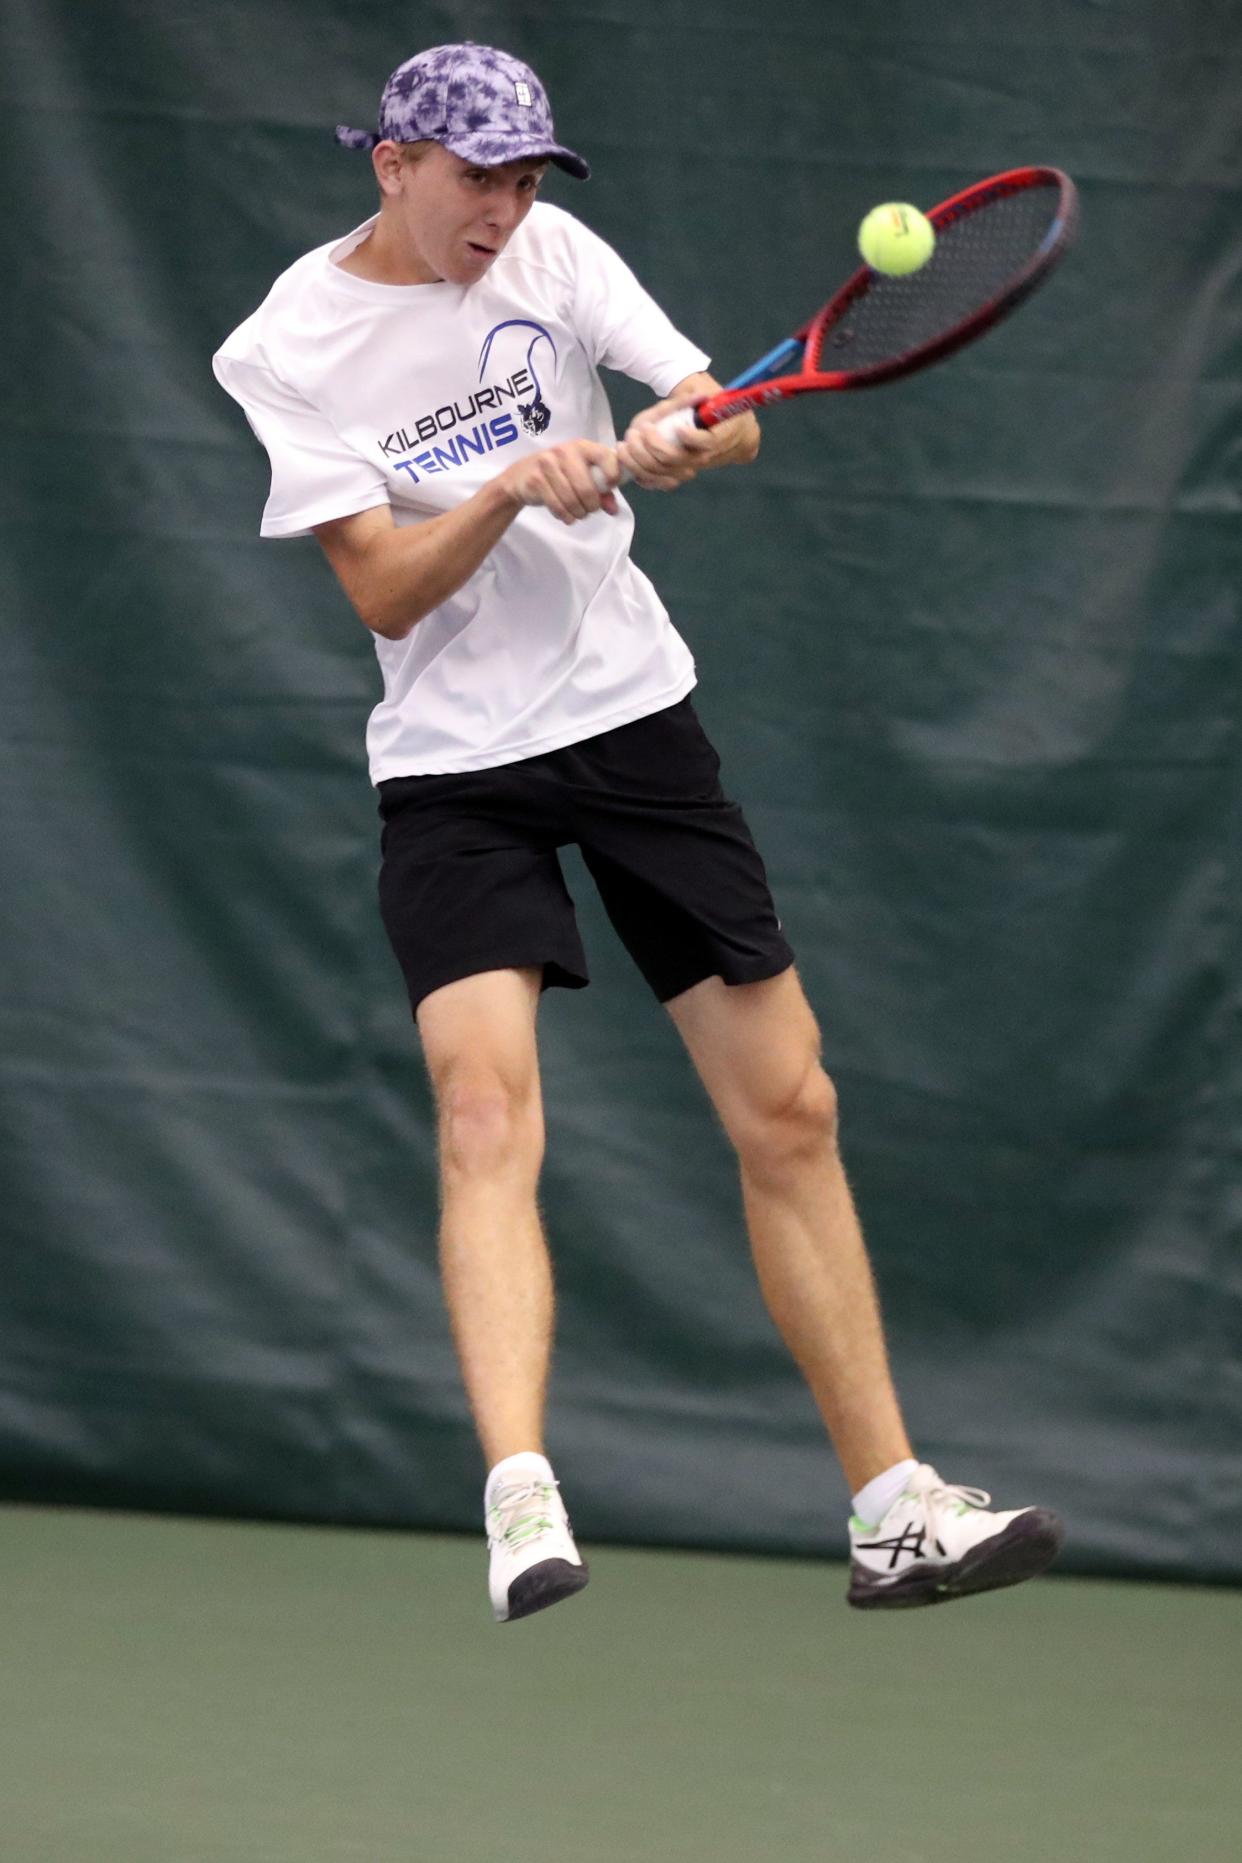 Kilbourne's Owen Alderman plays his opening Division I state match against Mason's Vignesh Gogineni on May 27 at Camargo Racquet Club in Cincinnati. Alderman lost 6-0, 6-0. Gogineni went on to win the singles title.